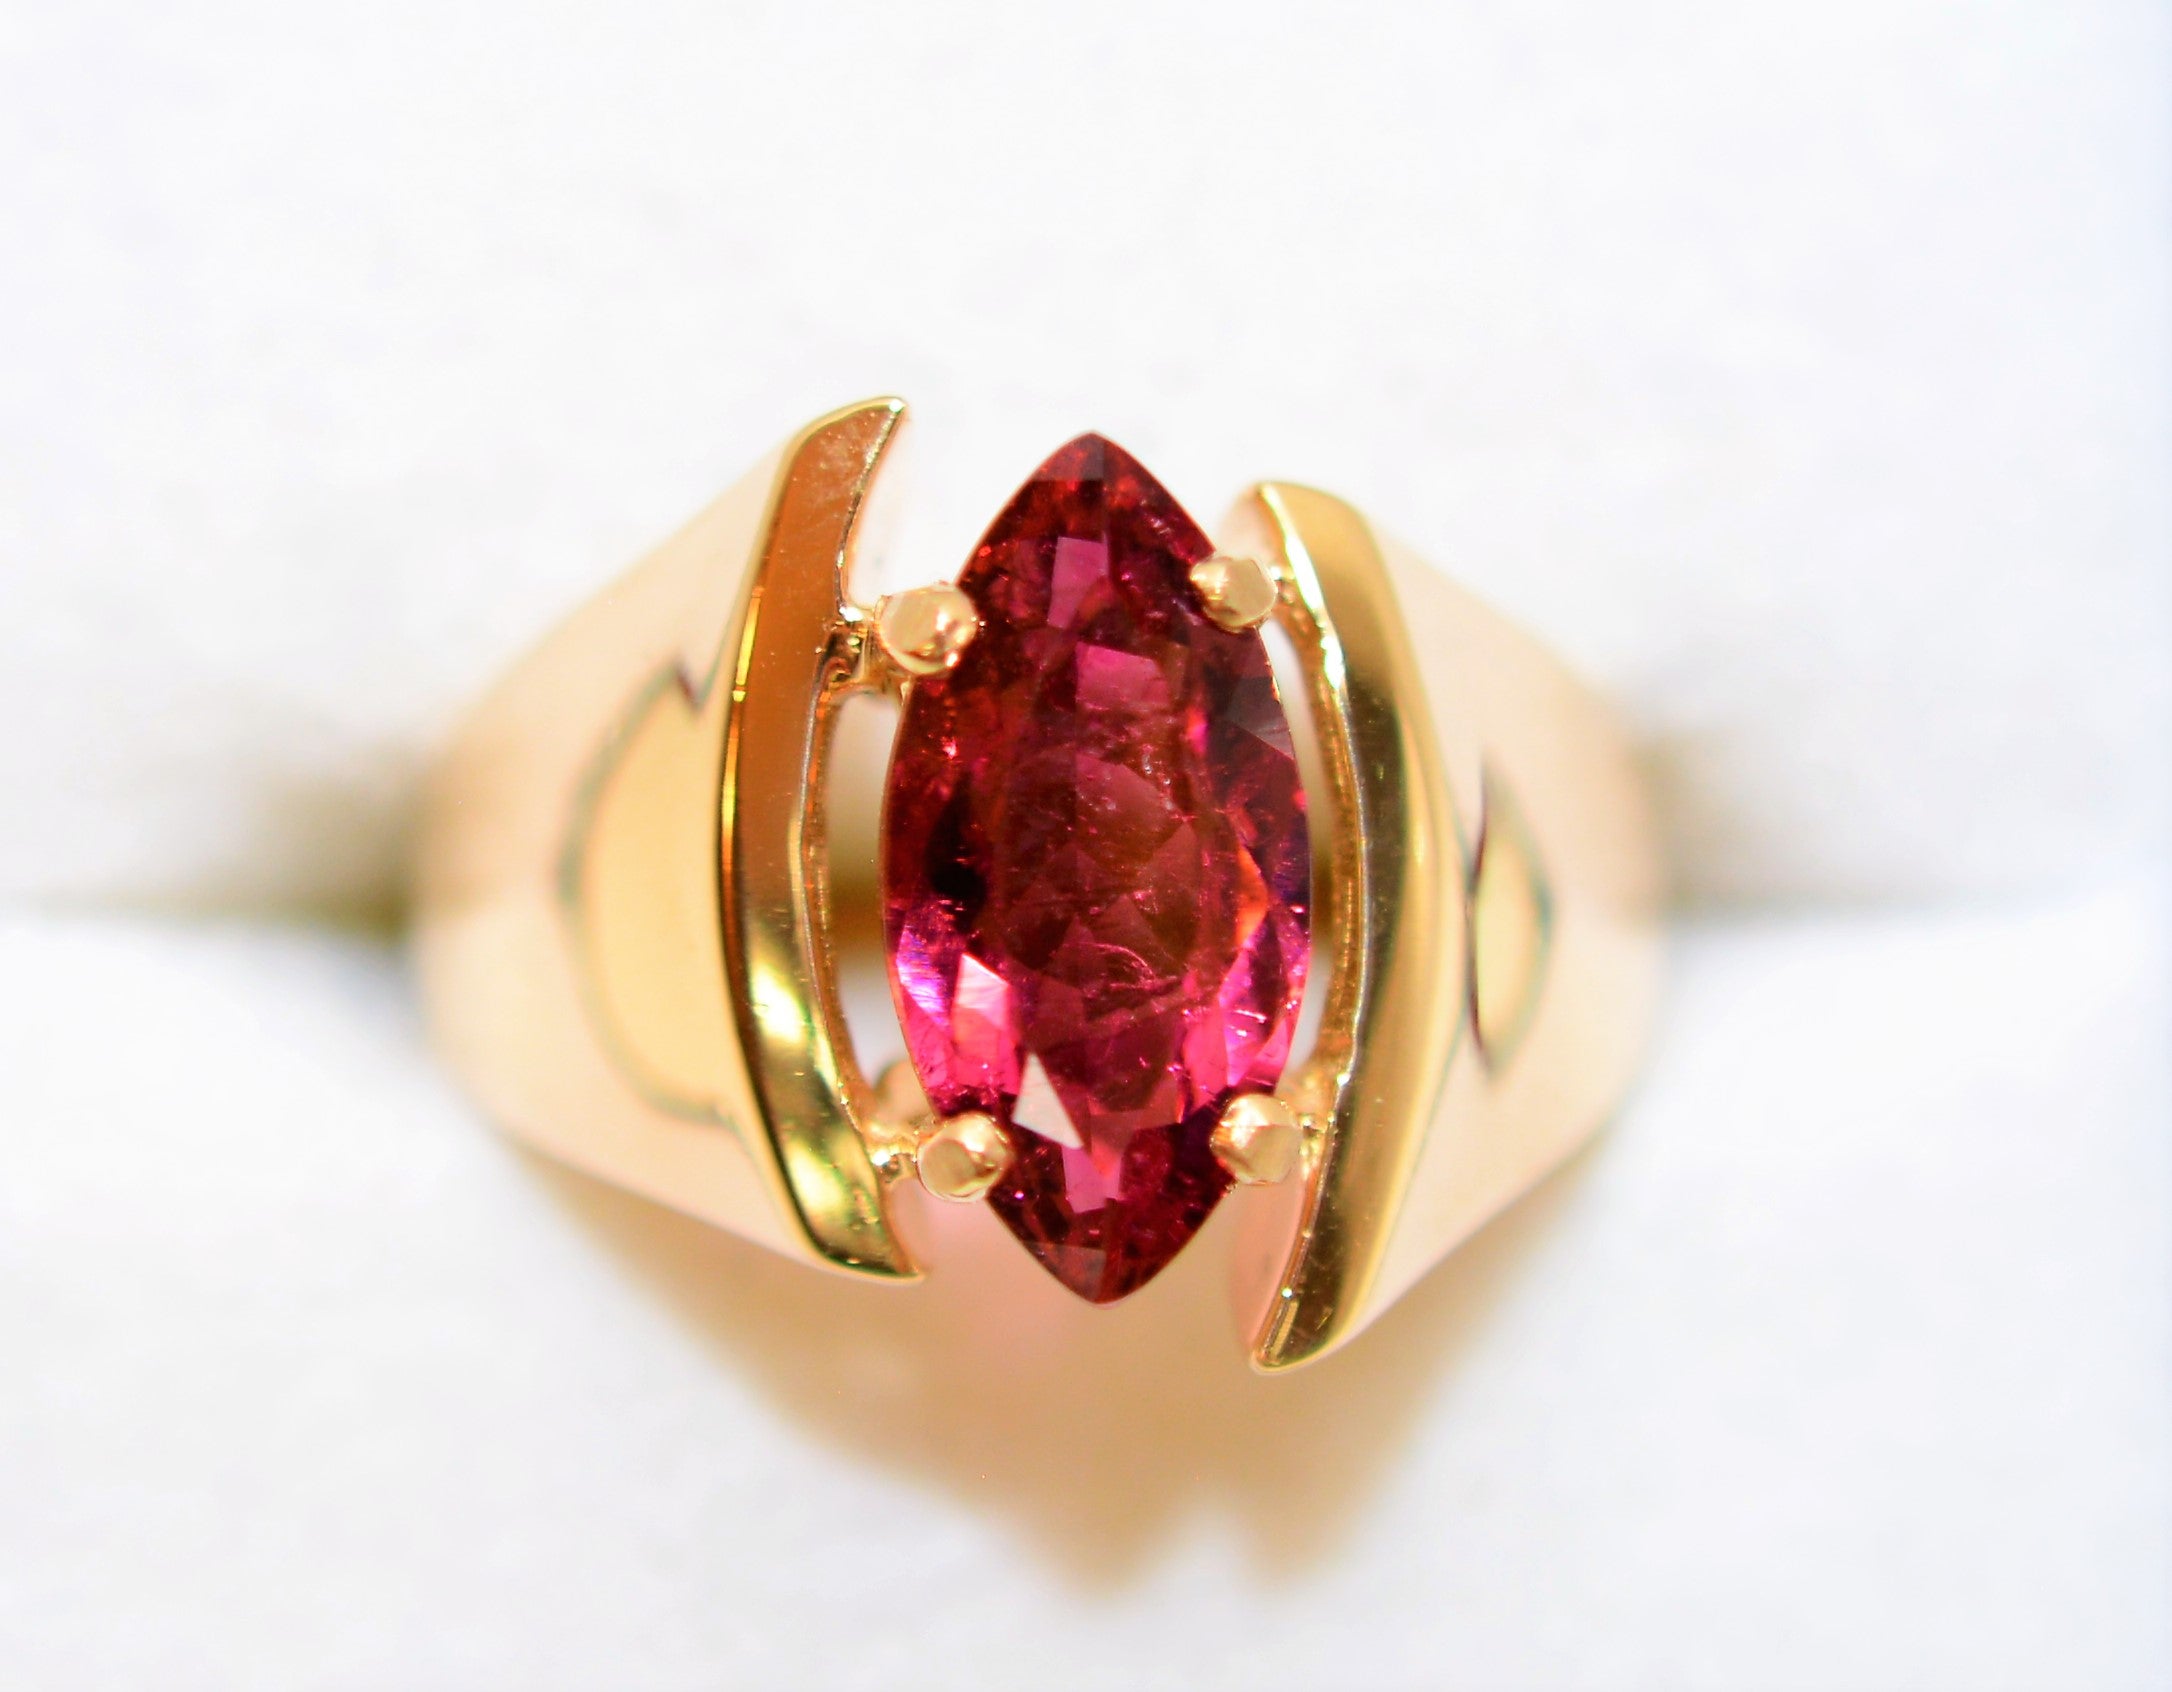 Natural Rubellite Ring 14K Solid Gold 1.92ct Pink Tourmaline Ring Solitaire Ring Cocktail Ring Gemstone Ring Womens Ring Ladies Ring Jewelry